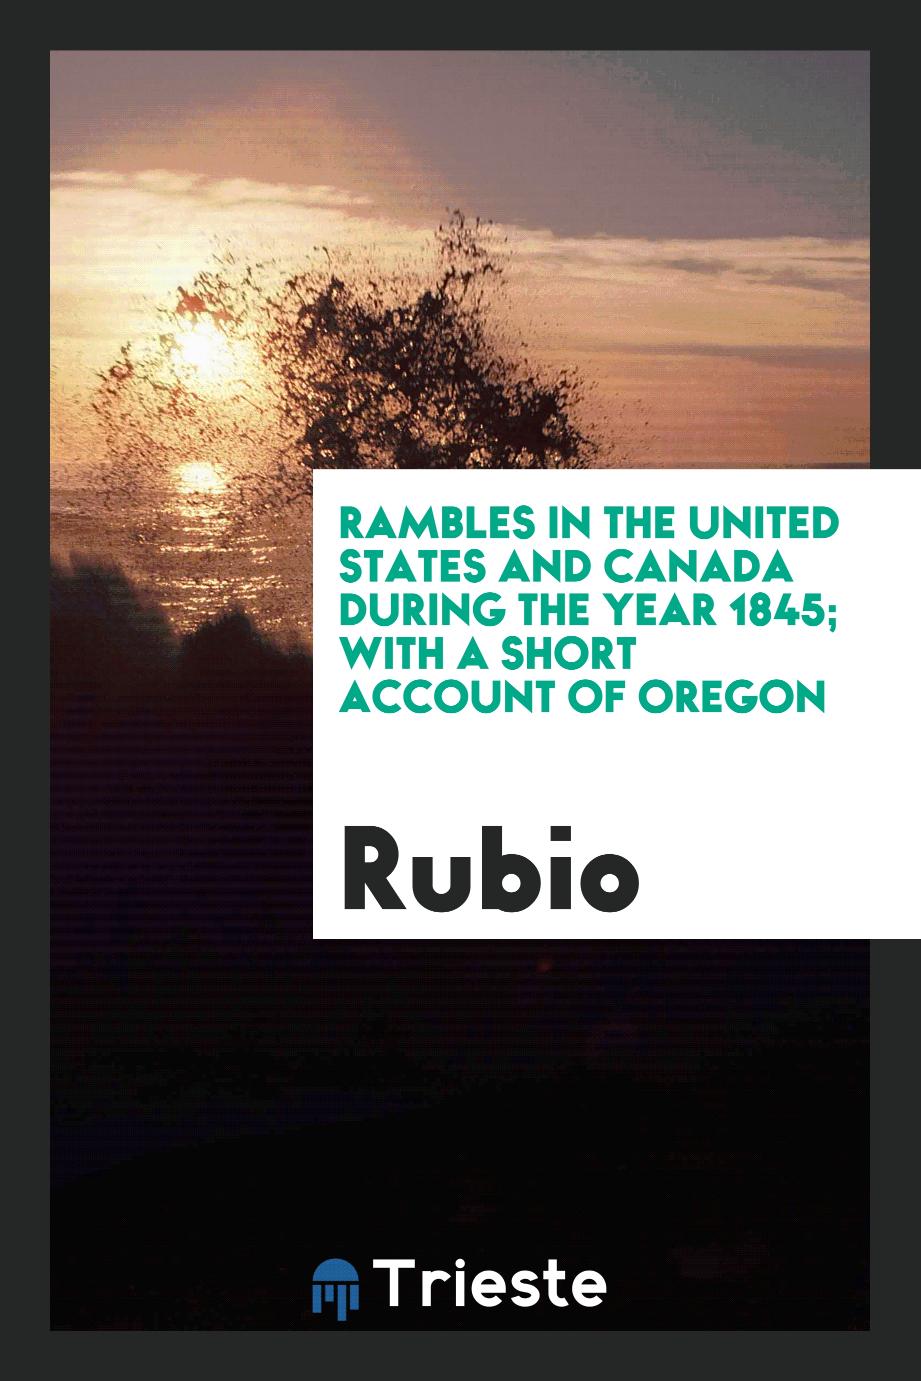 Rambles in the United States and Canada during the year 1845; with a short account of Oregon